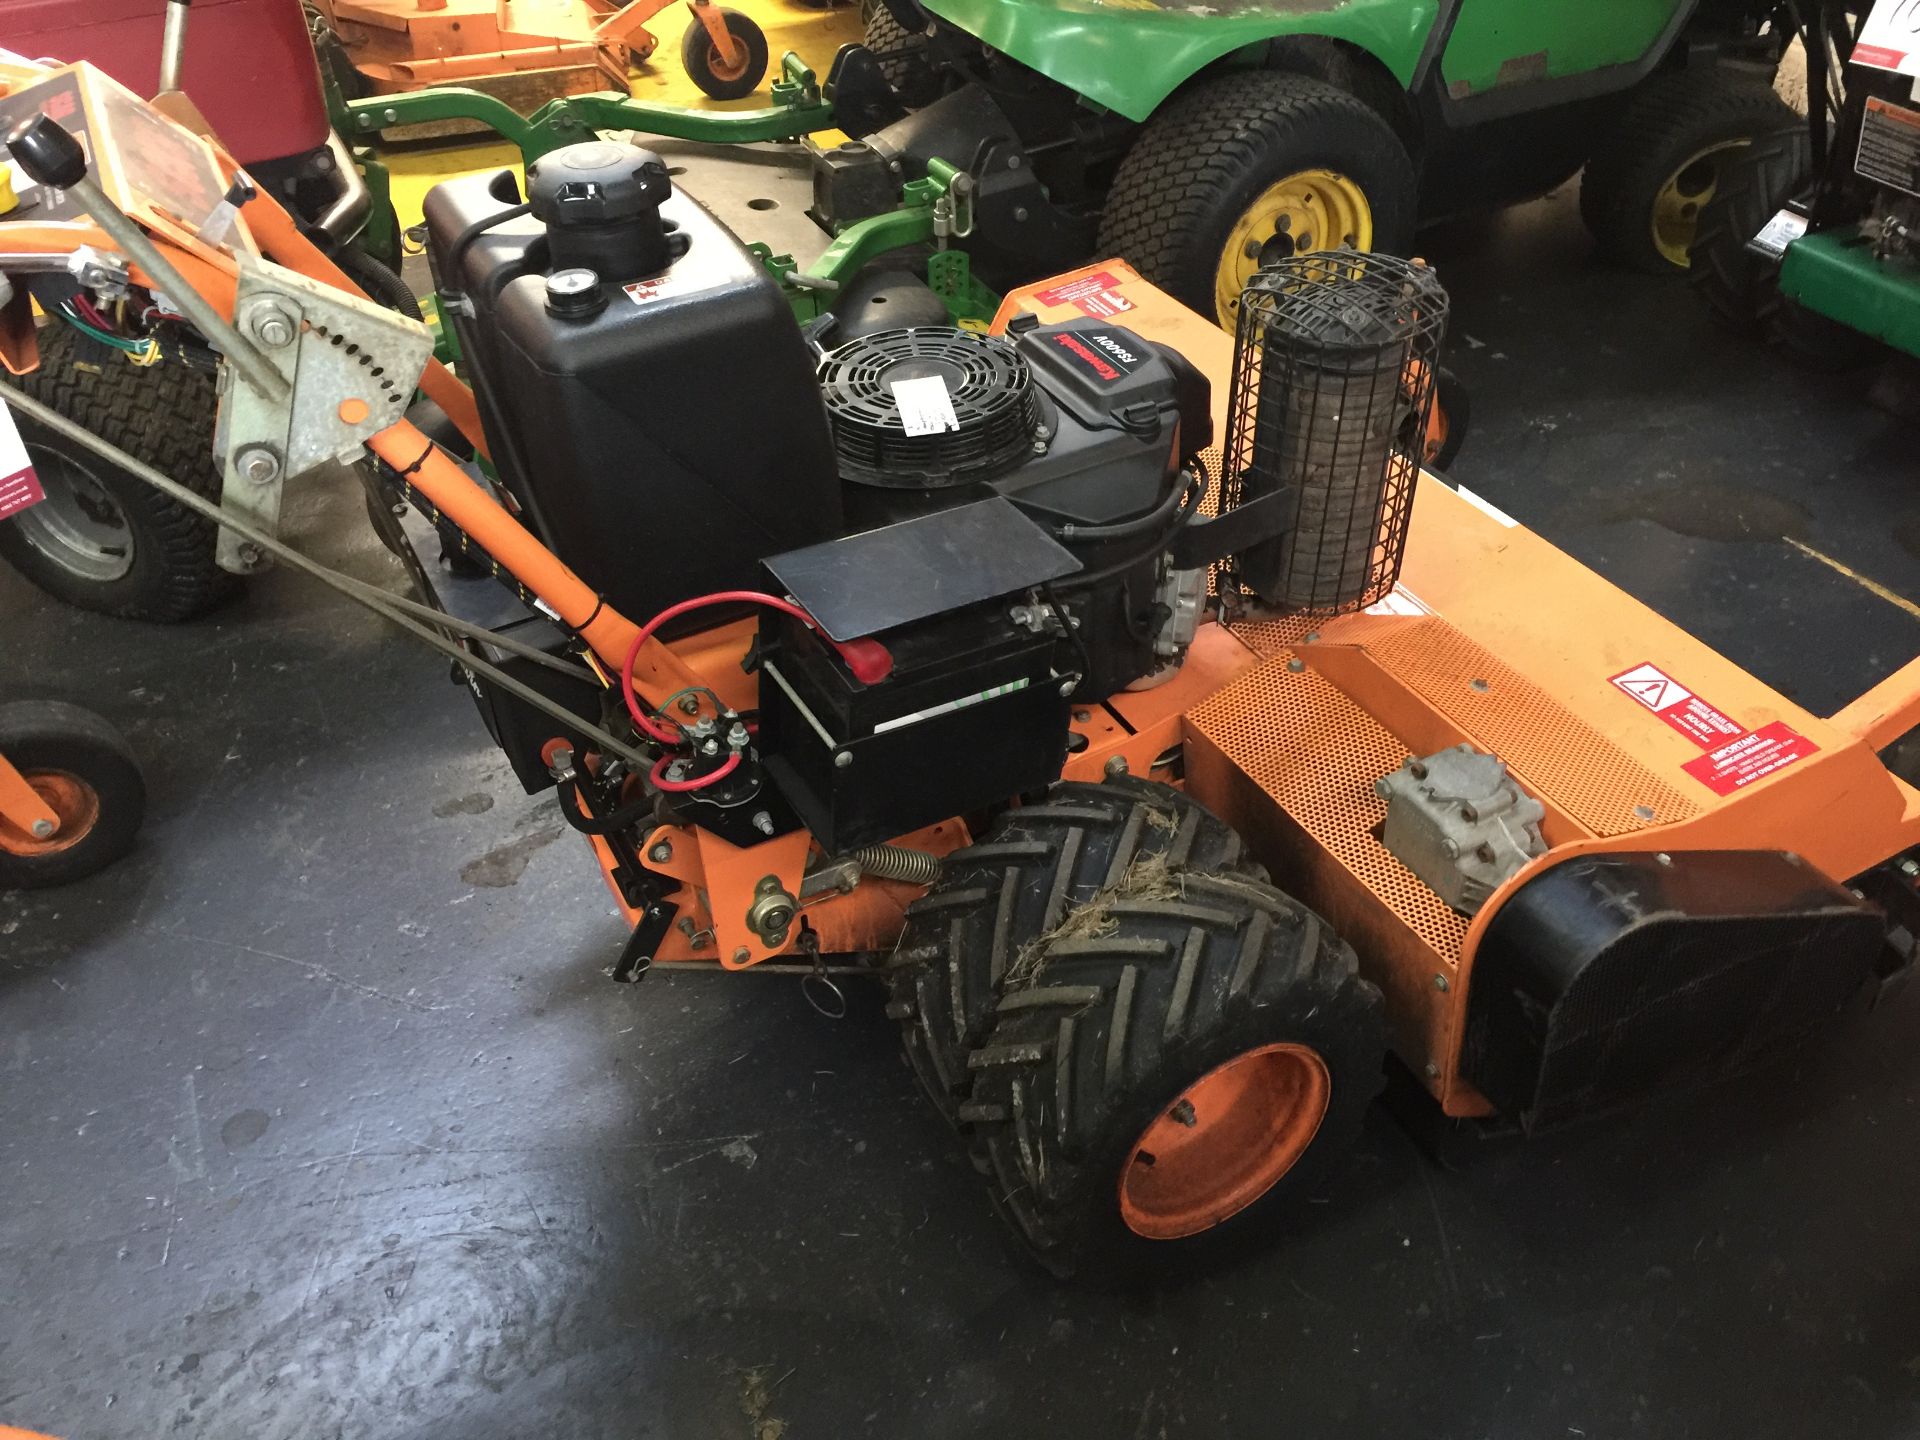 Scag Hydro-Drive SWZ36A14FS Large Pedestrian Rotary Mower with electric starter and STM F48 Super fl - Bild 4 aus 4